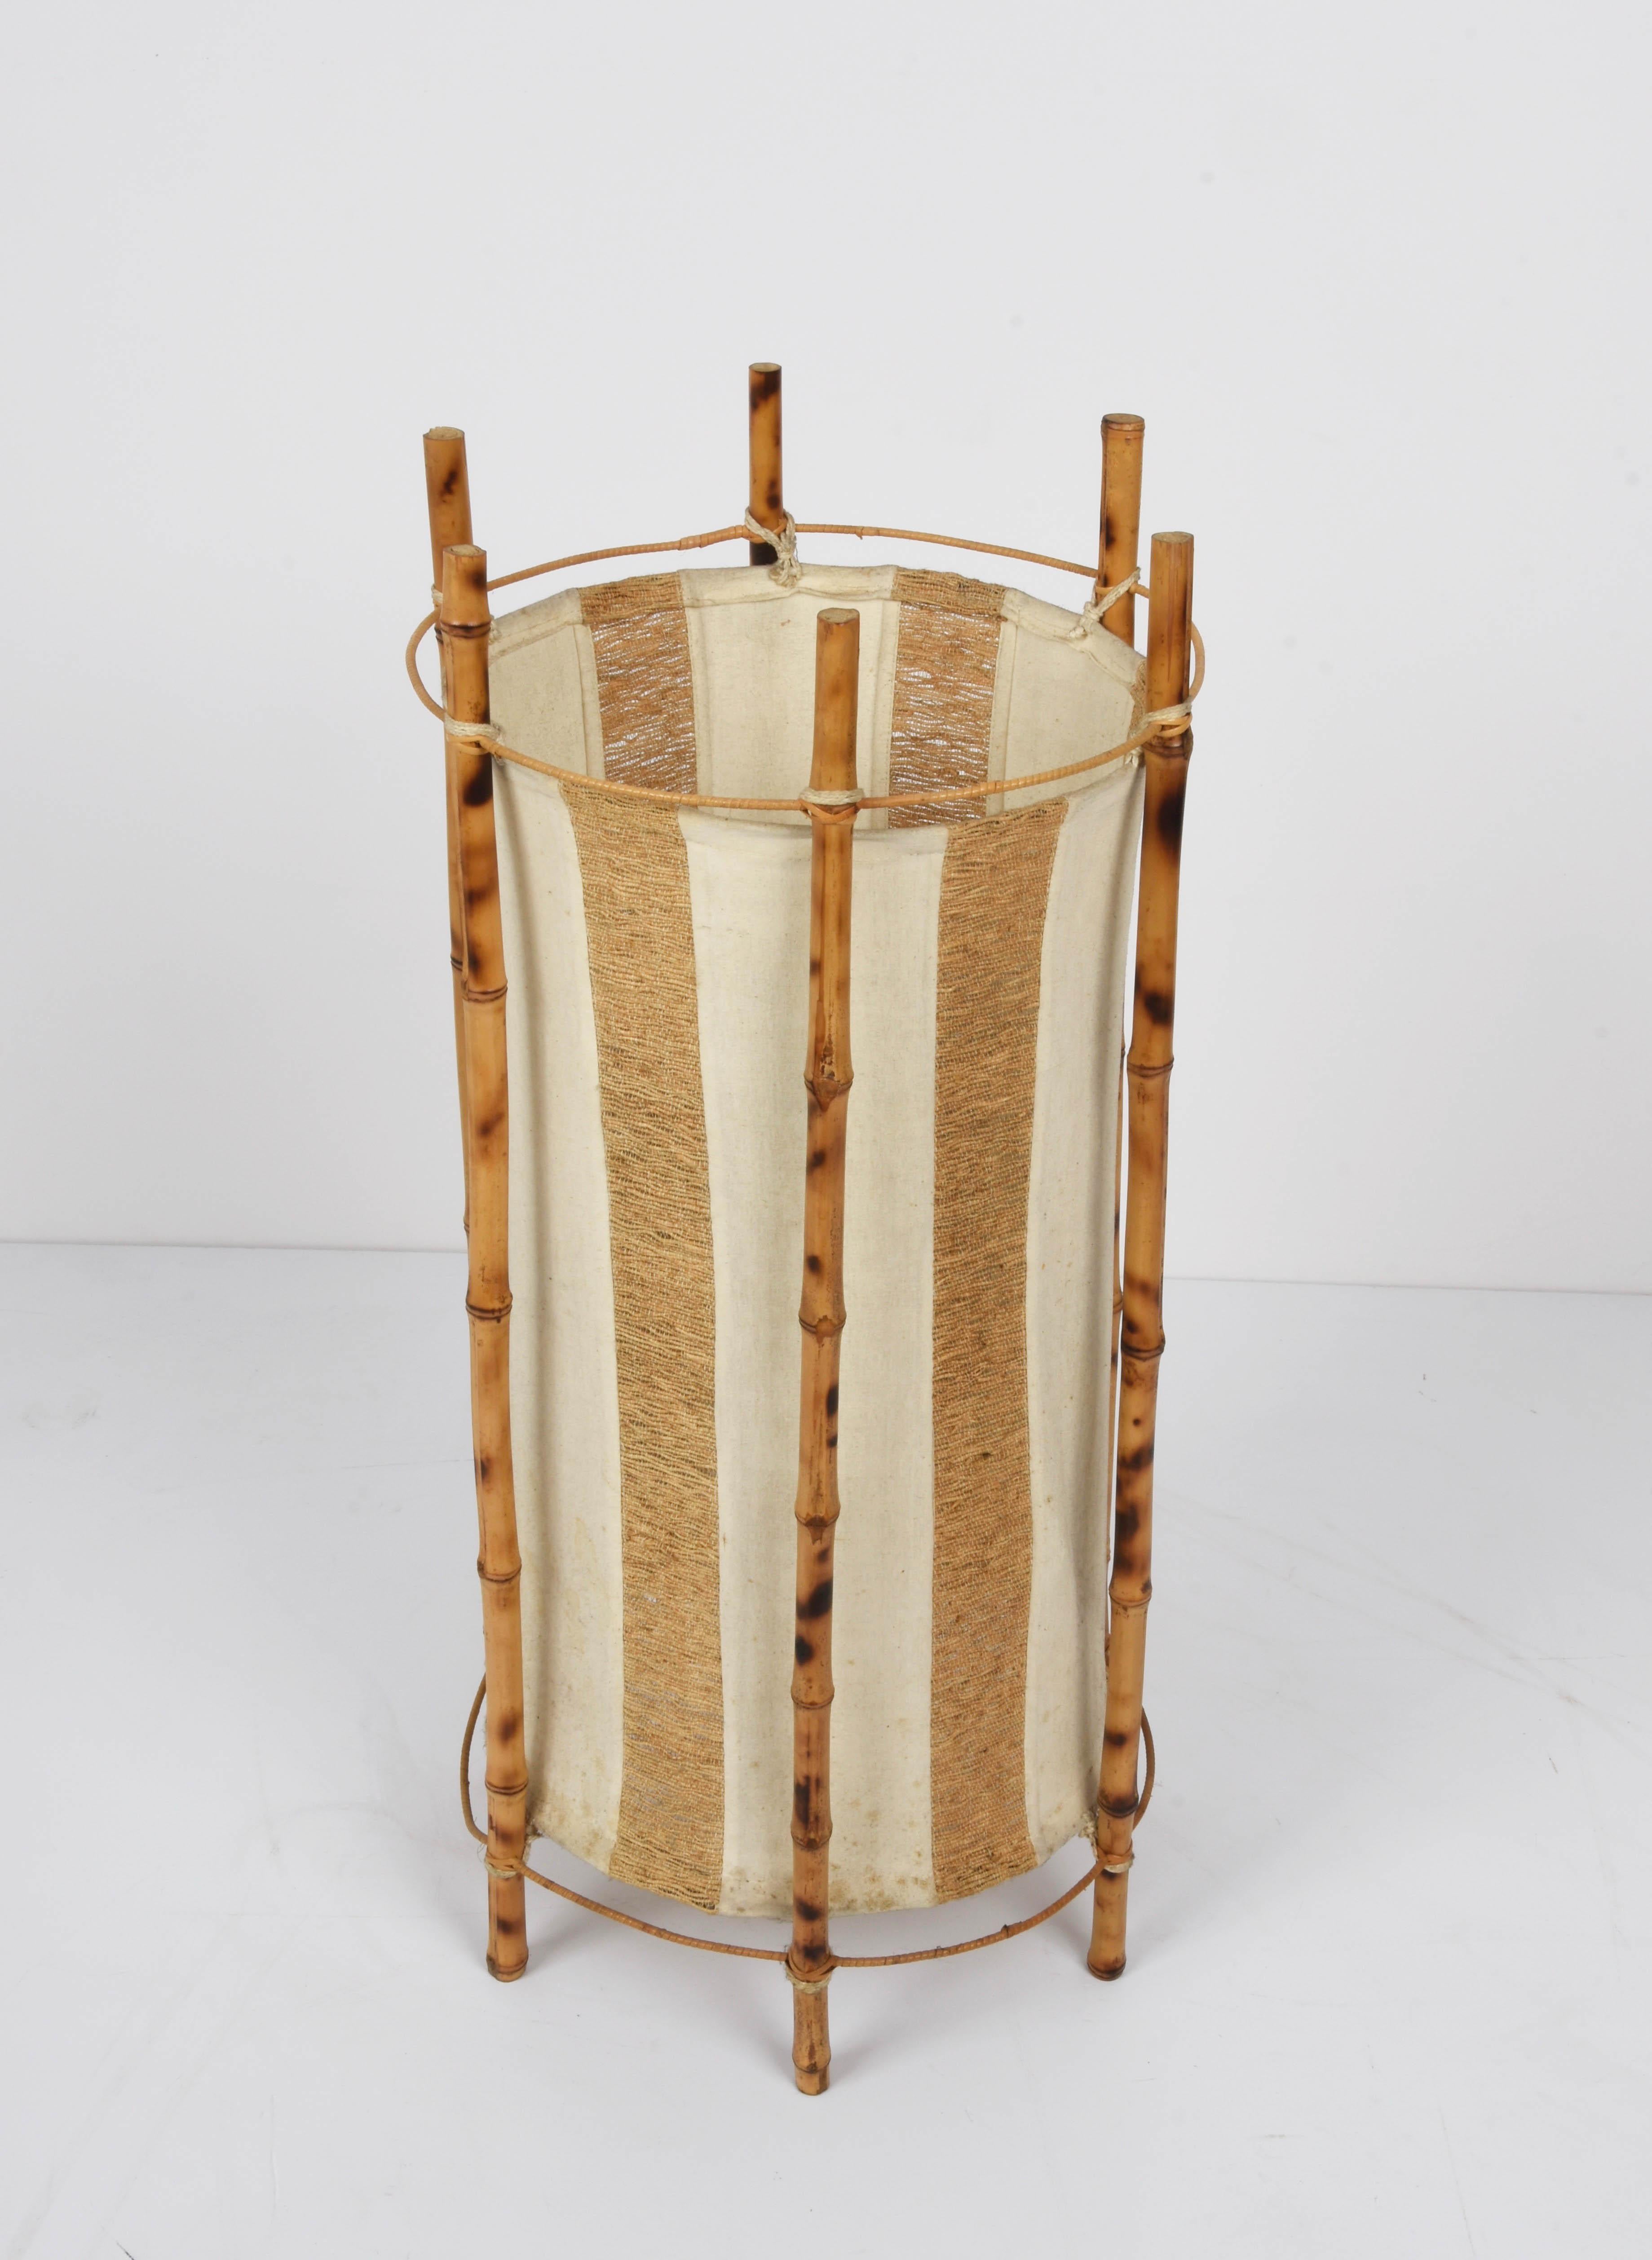 Louis Sognot Midcentury Cotton, Bamboo and Rattan Italian Floor Lamp, 1950s For Sale 7